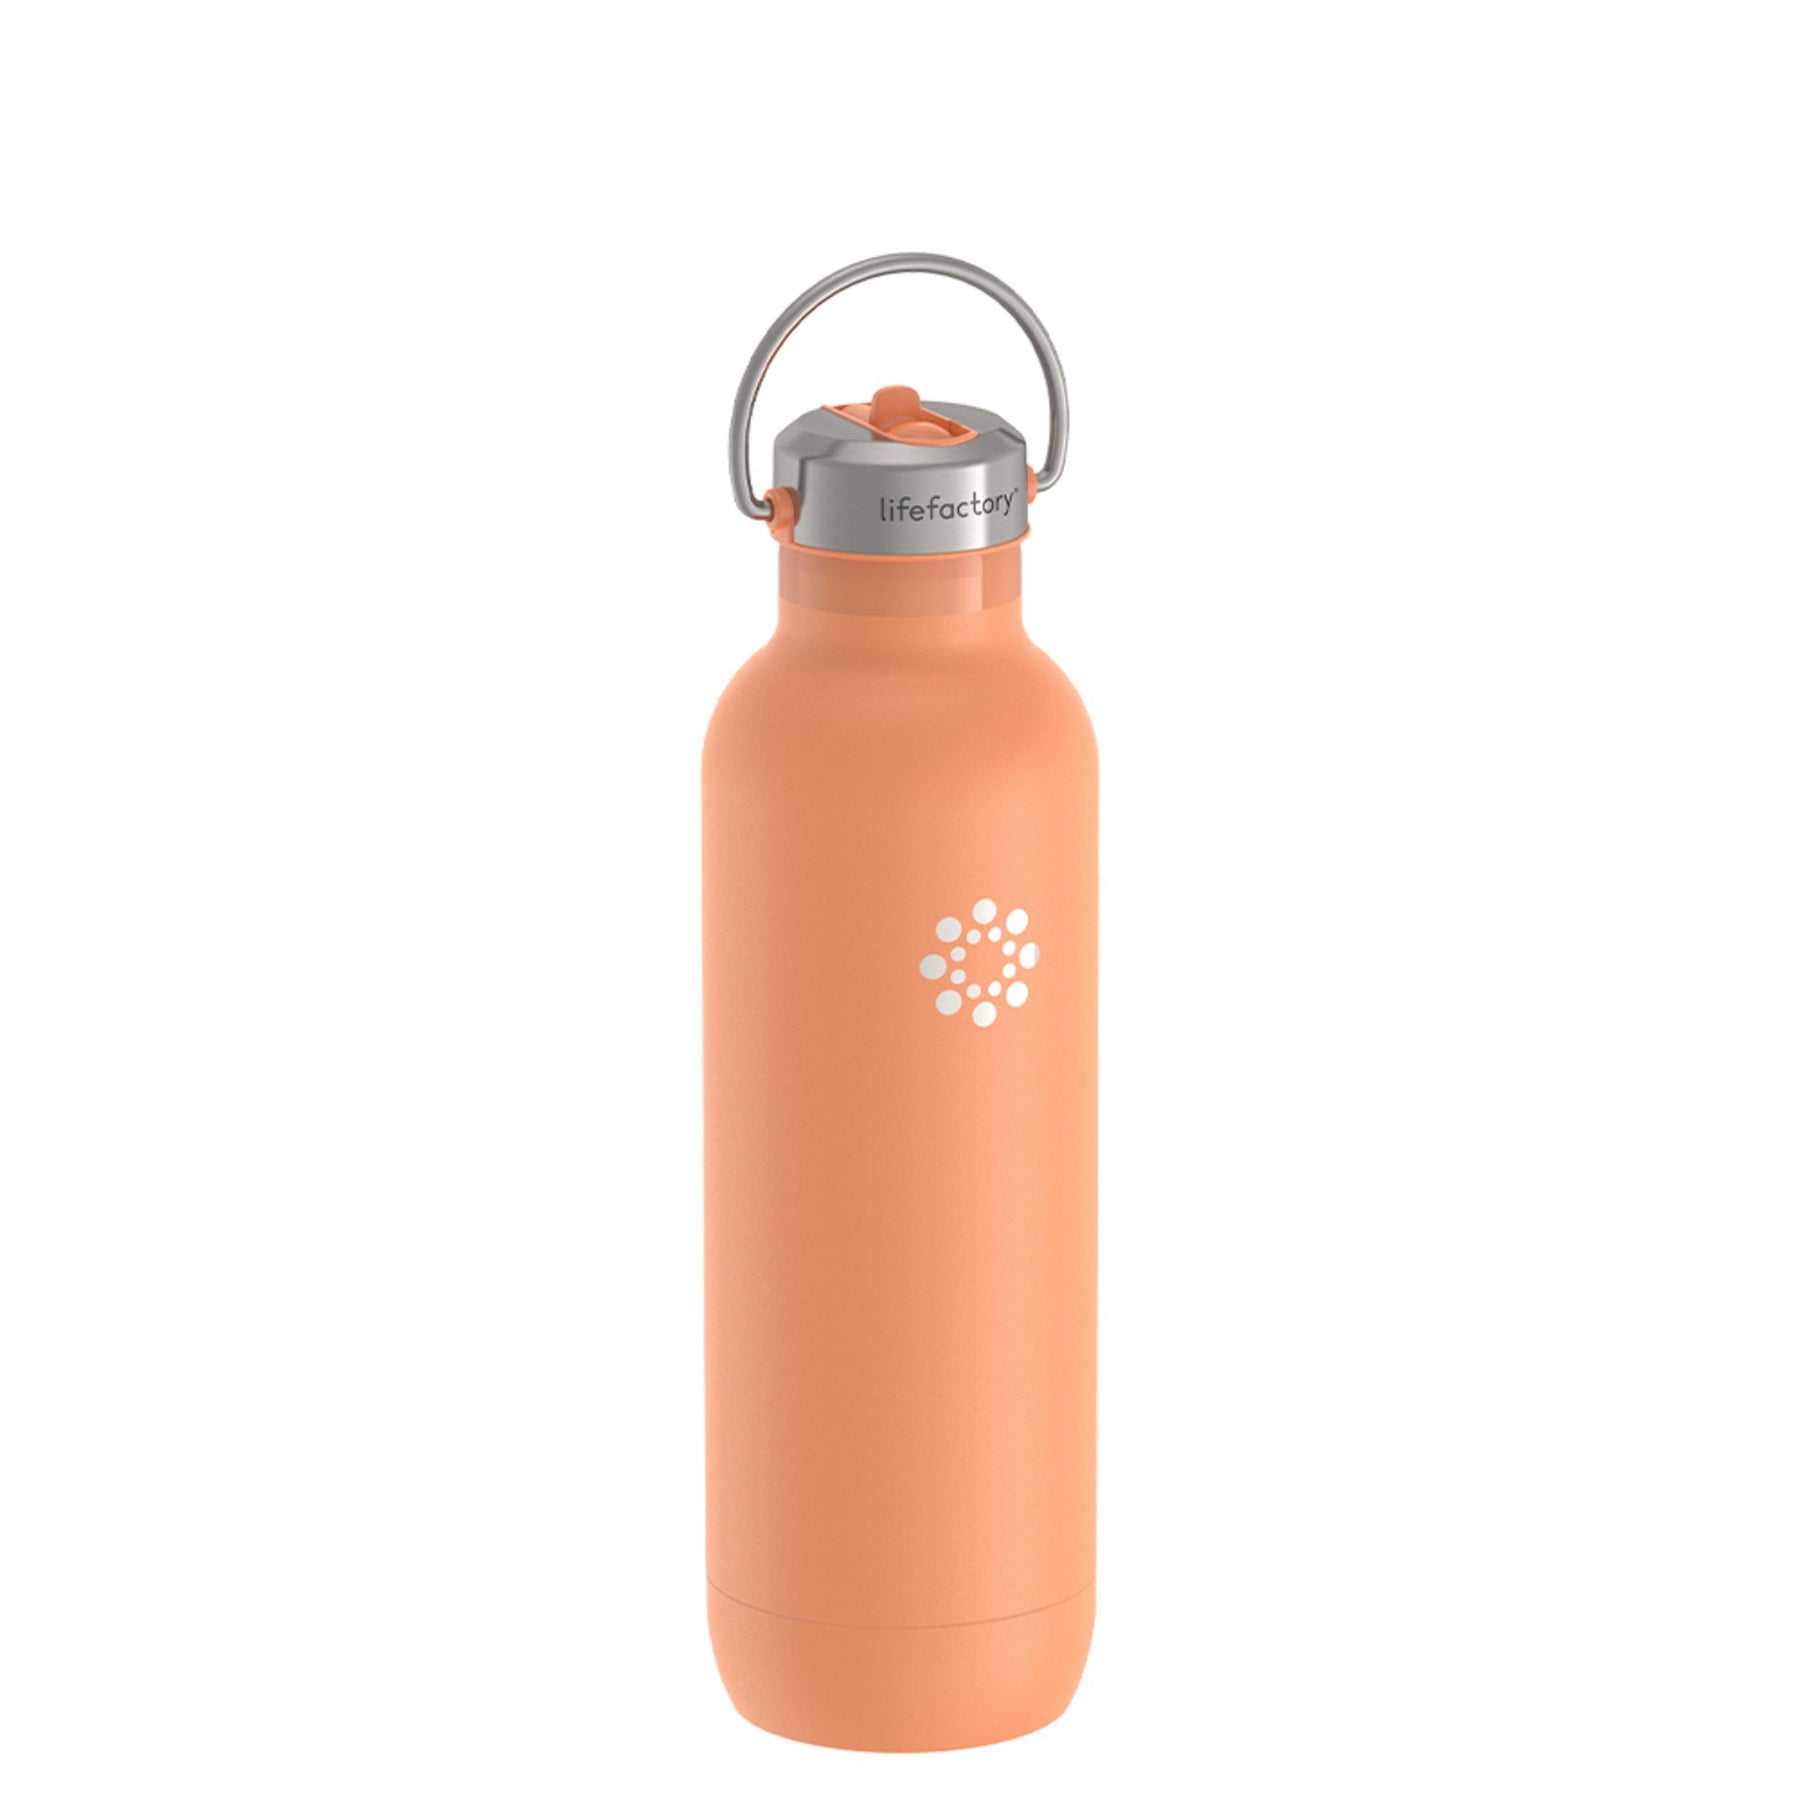 Lifefactory Stainless Steel Vacuum Insulated Sports Bottle with Straw Cap, 24 Ounce, Carbon